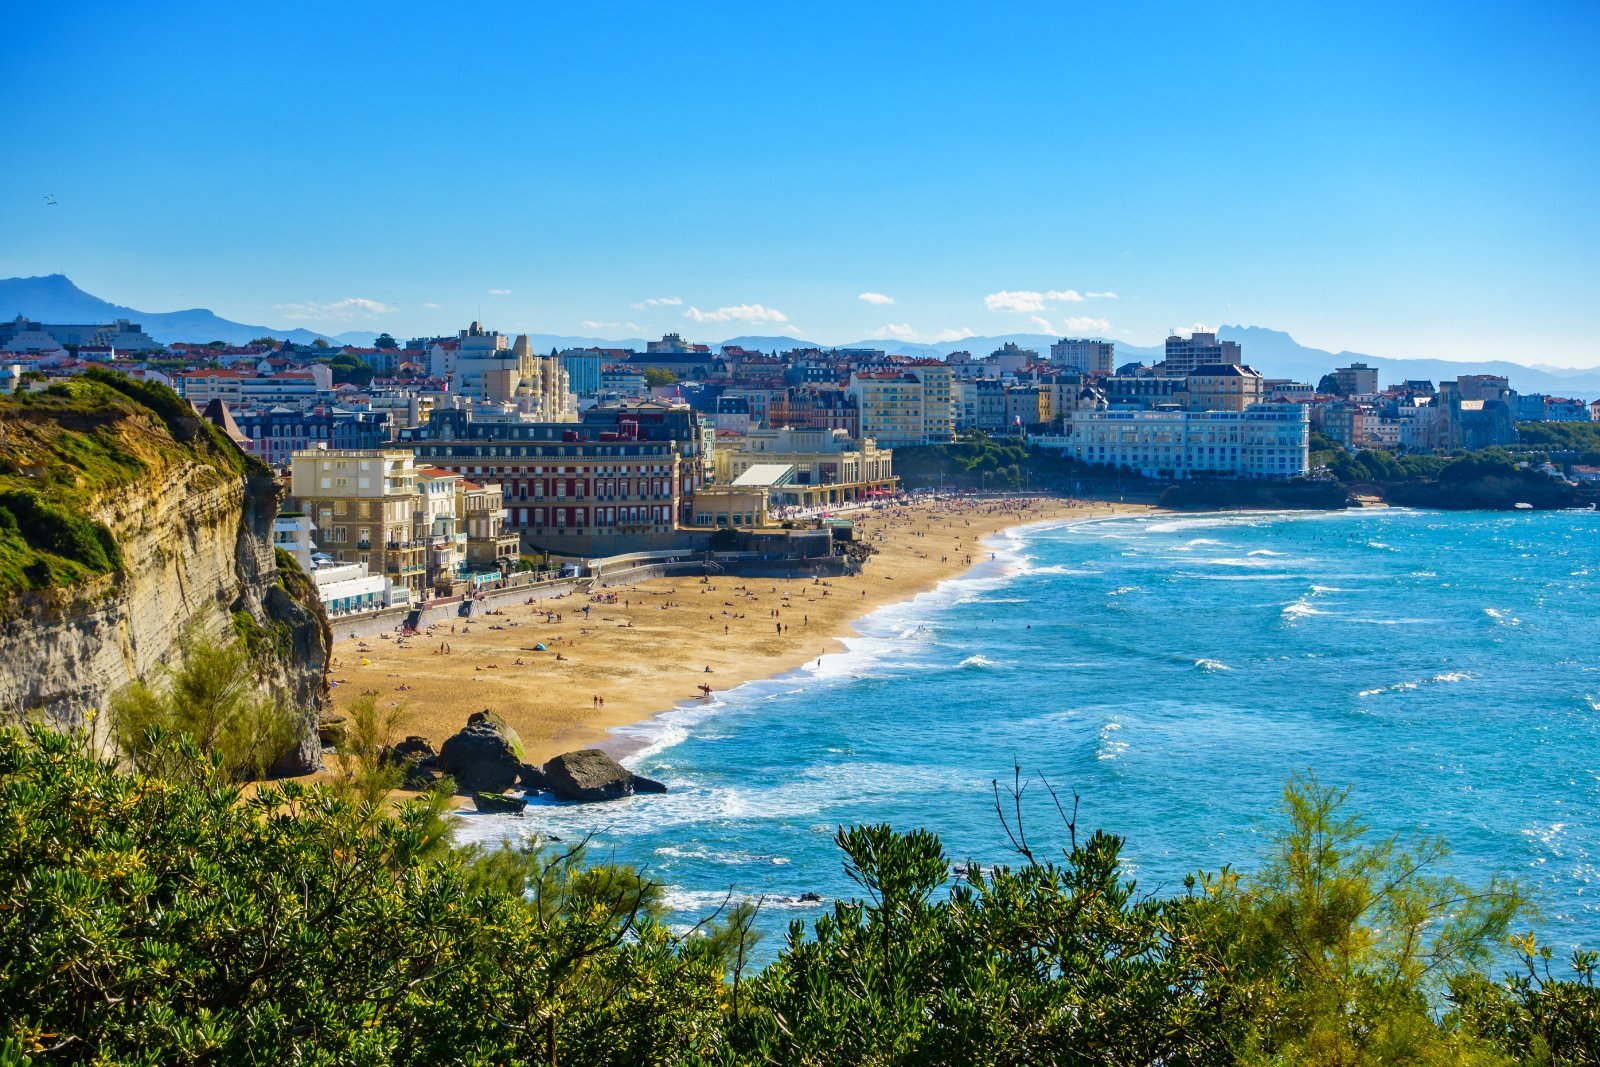 Image Credit: Shutterstock / Thomas Dutour <p>Discover the wild beauty of the Basque country in Biarritz, where surfers brave the waves against a backdrop of stunning coastal cliffs.</p>